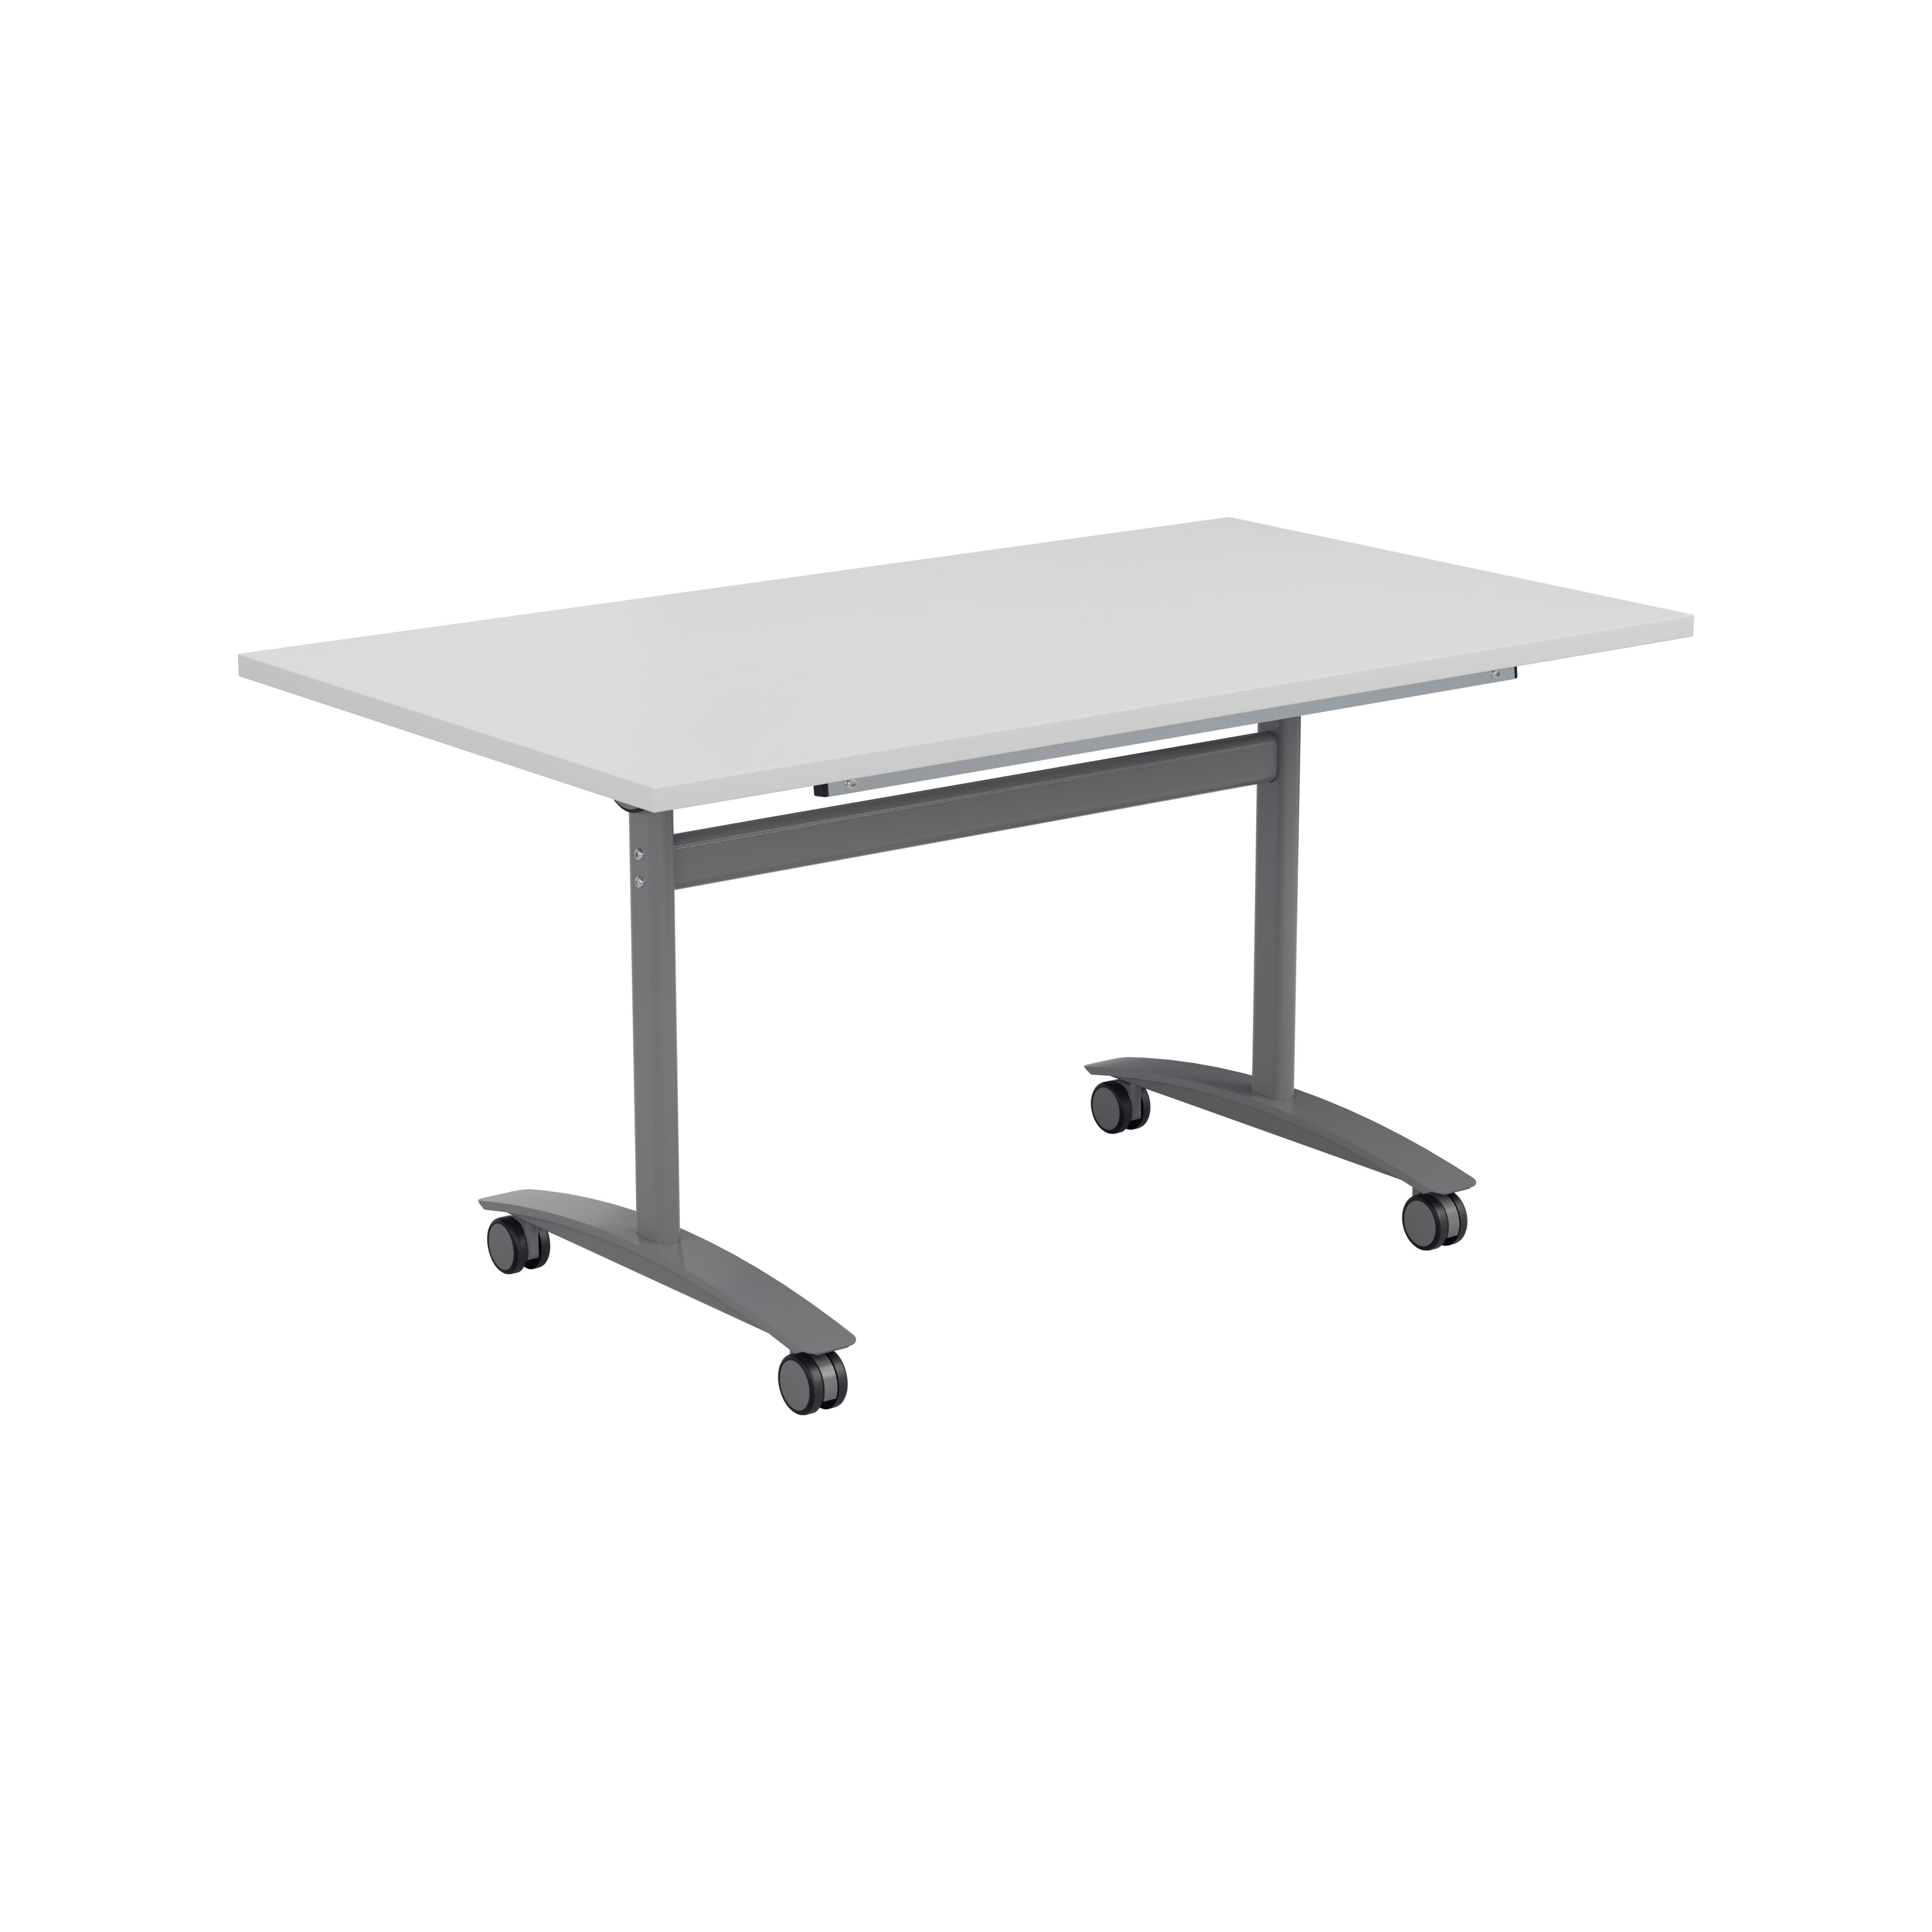 Tilting Table 1800 X 800 - White Top and Silver Legs